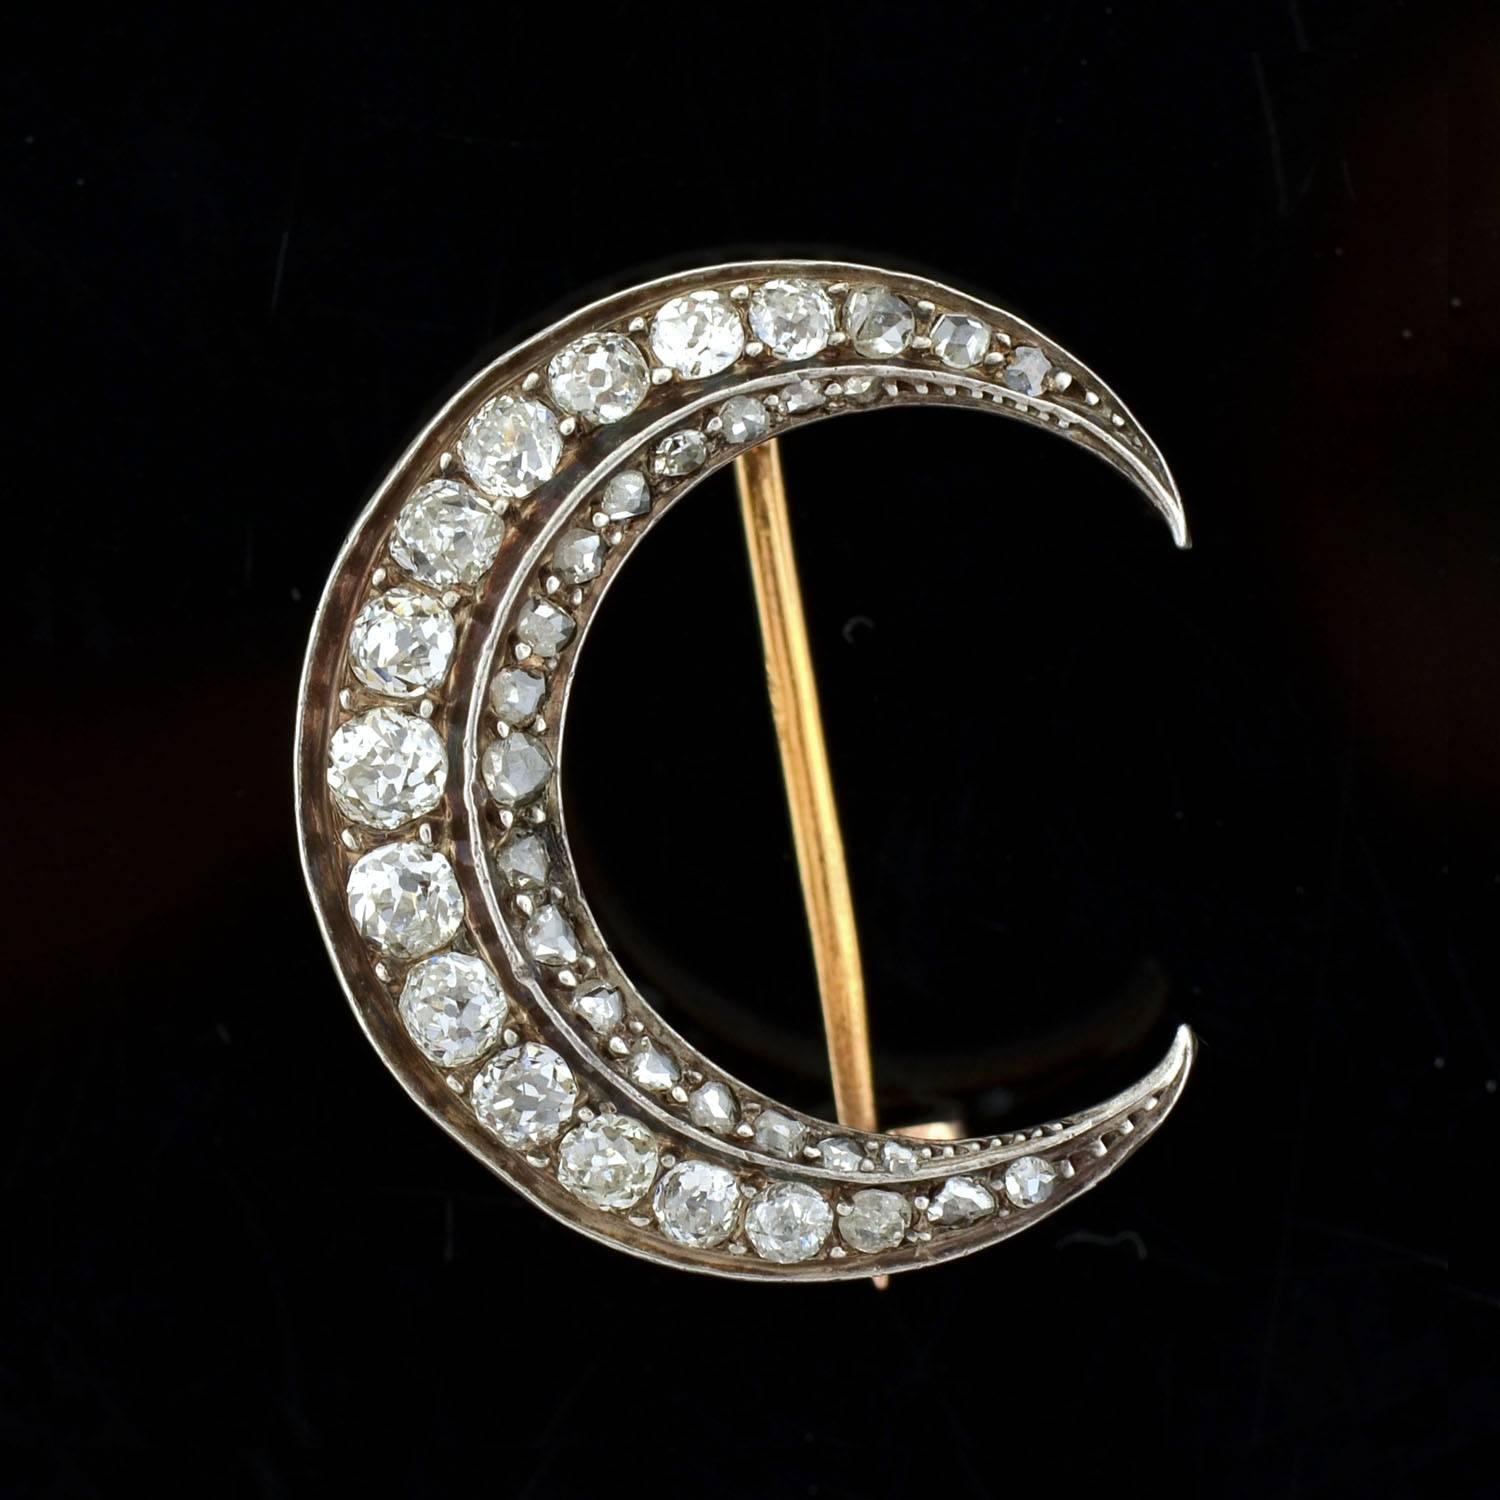 This diamond crescent from the Victorian era (ca1887) is truly stunning! Made of silver-topped 18kt gold, the piece is French in origin and depicts a beautiful crescent moon. The surface is completely encrusted with three dozen sparkling diamonds,